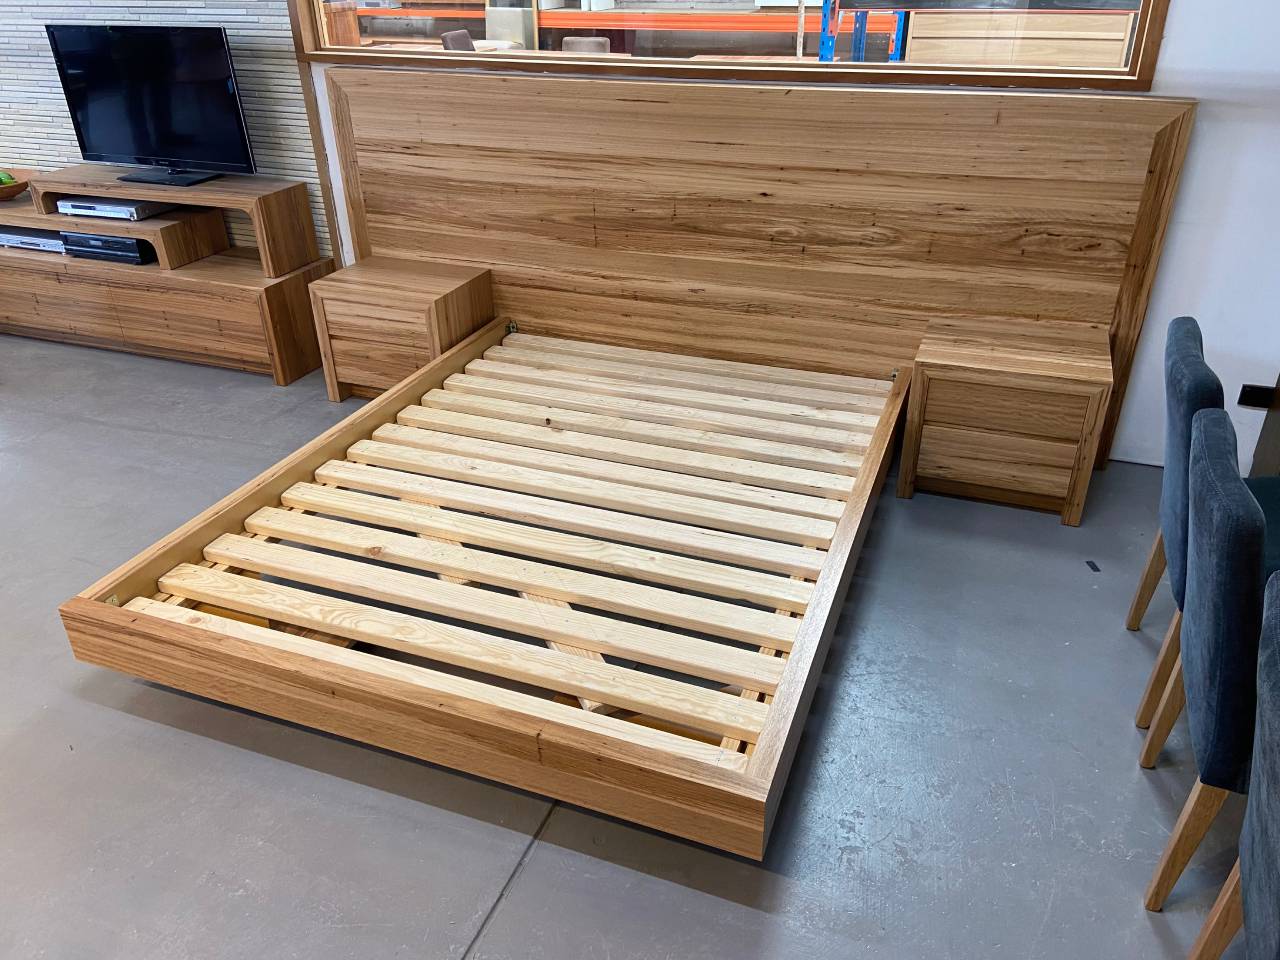 Samai Complete Bed Blackbutt Timber Quality Furniture Made in Adelaide, South Australia